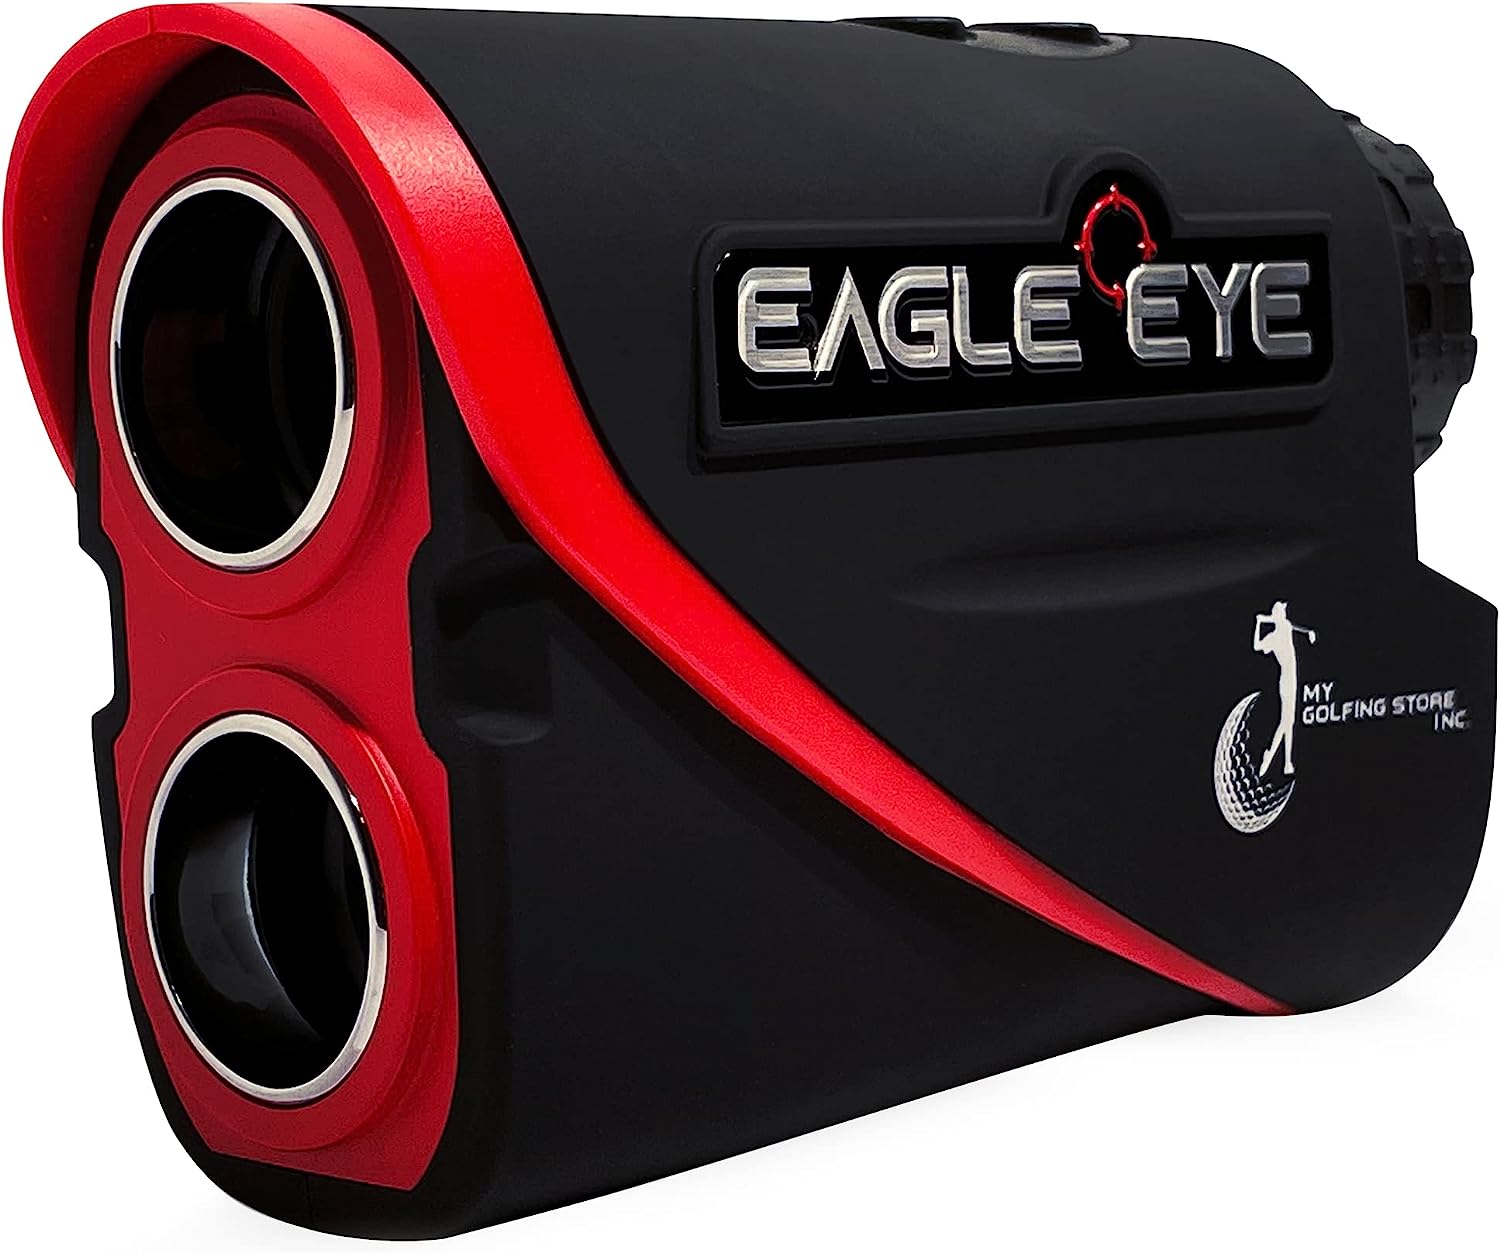 Classic Golf - rangefinder with slope